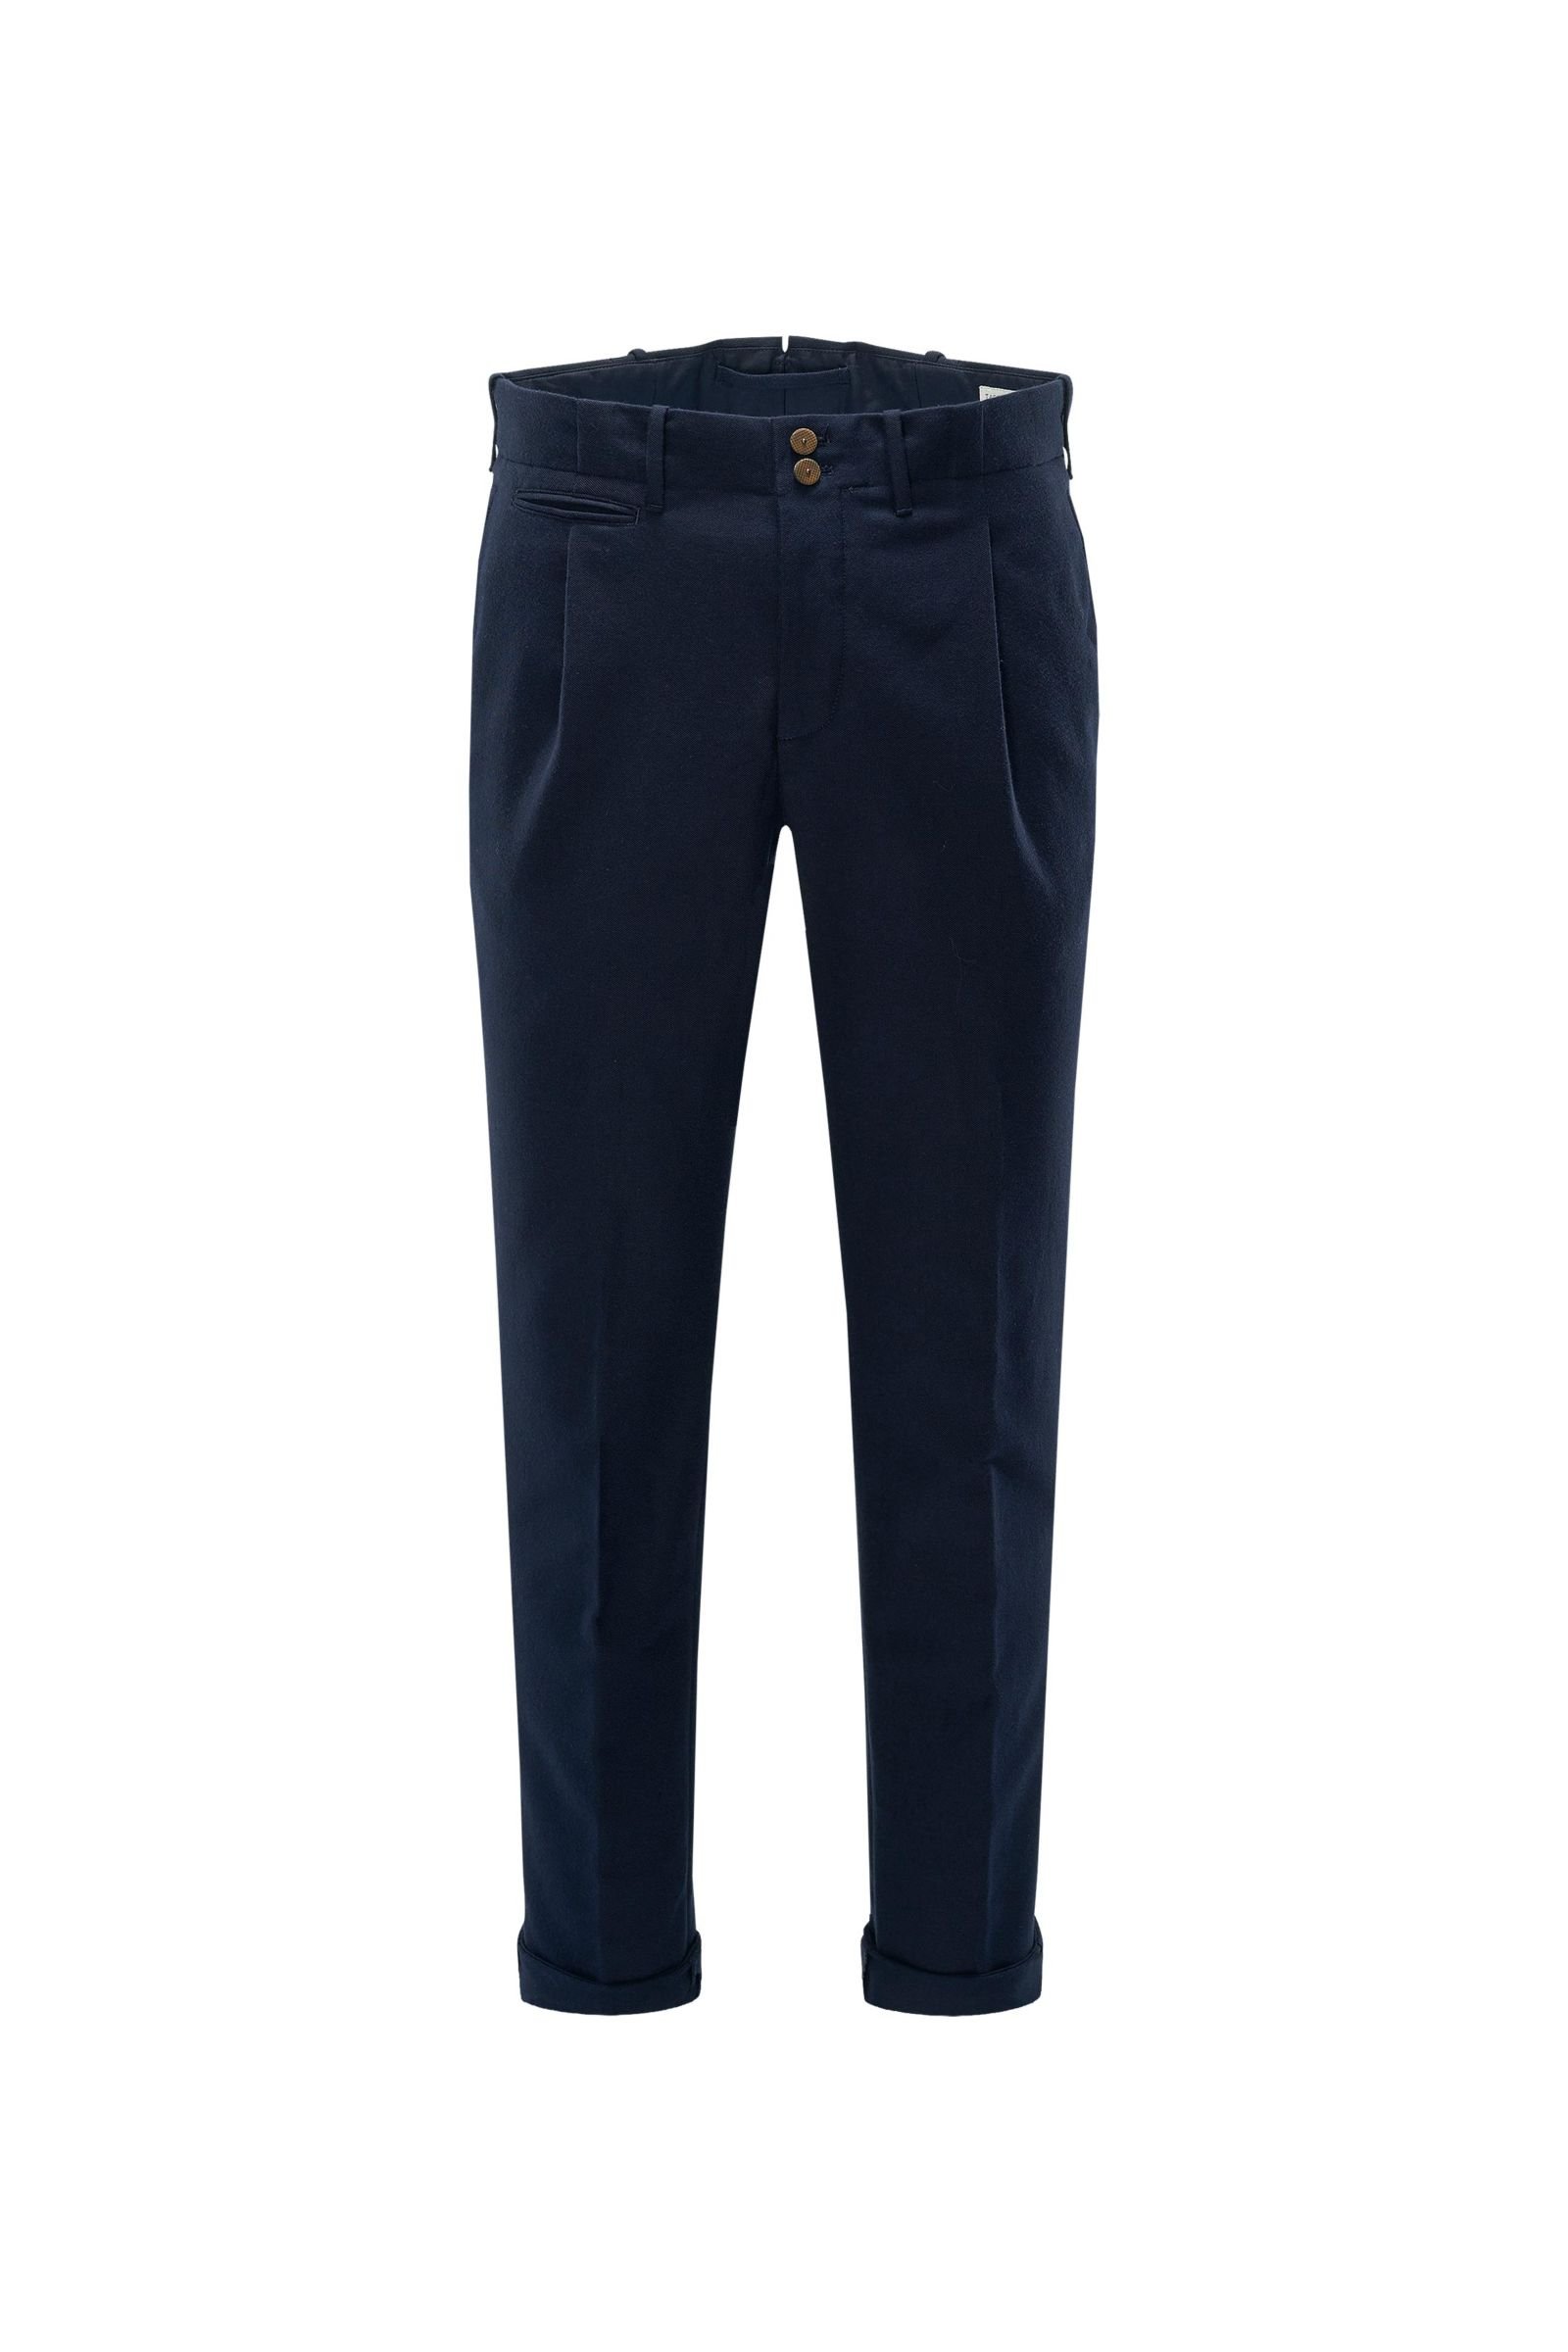 Chino 'Carrot Fit' navy